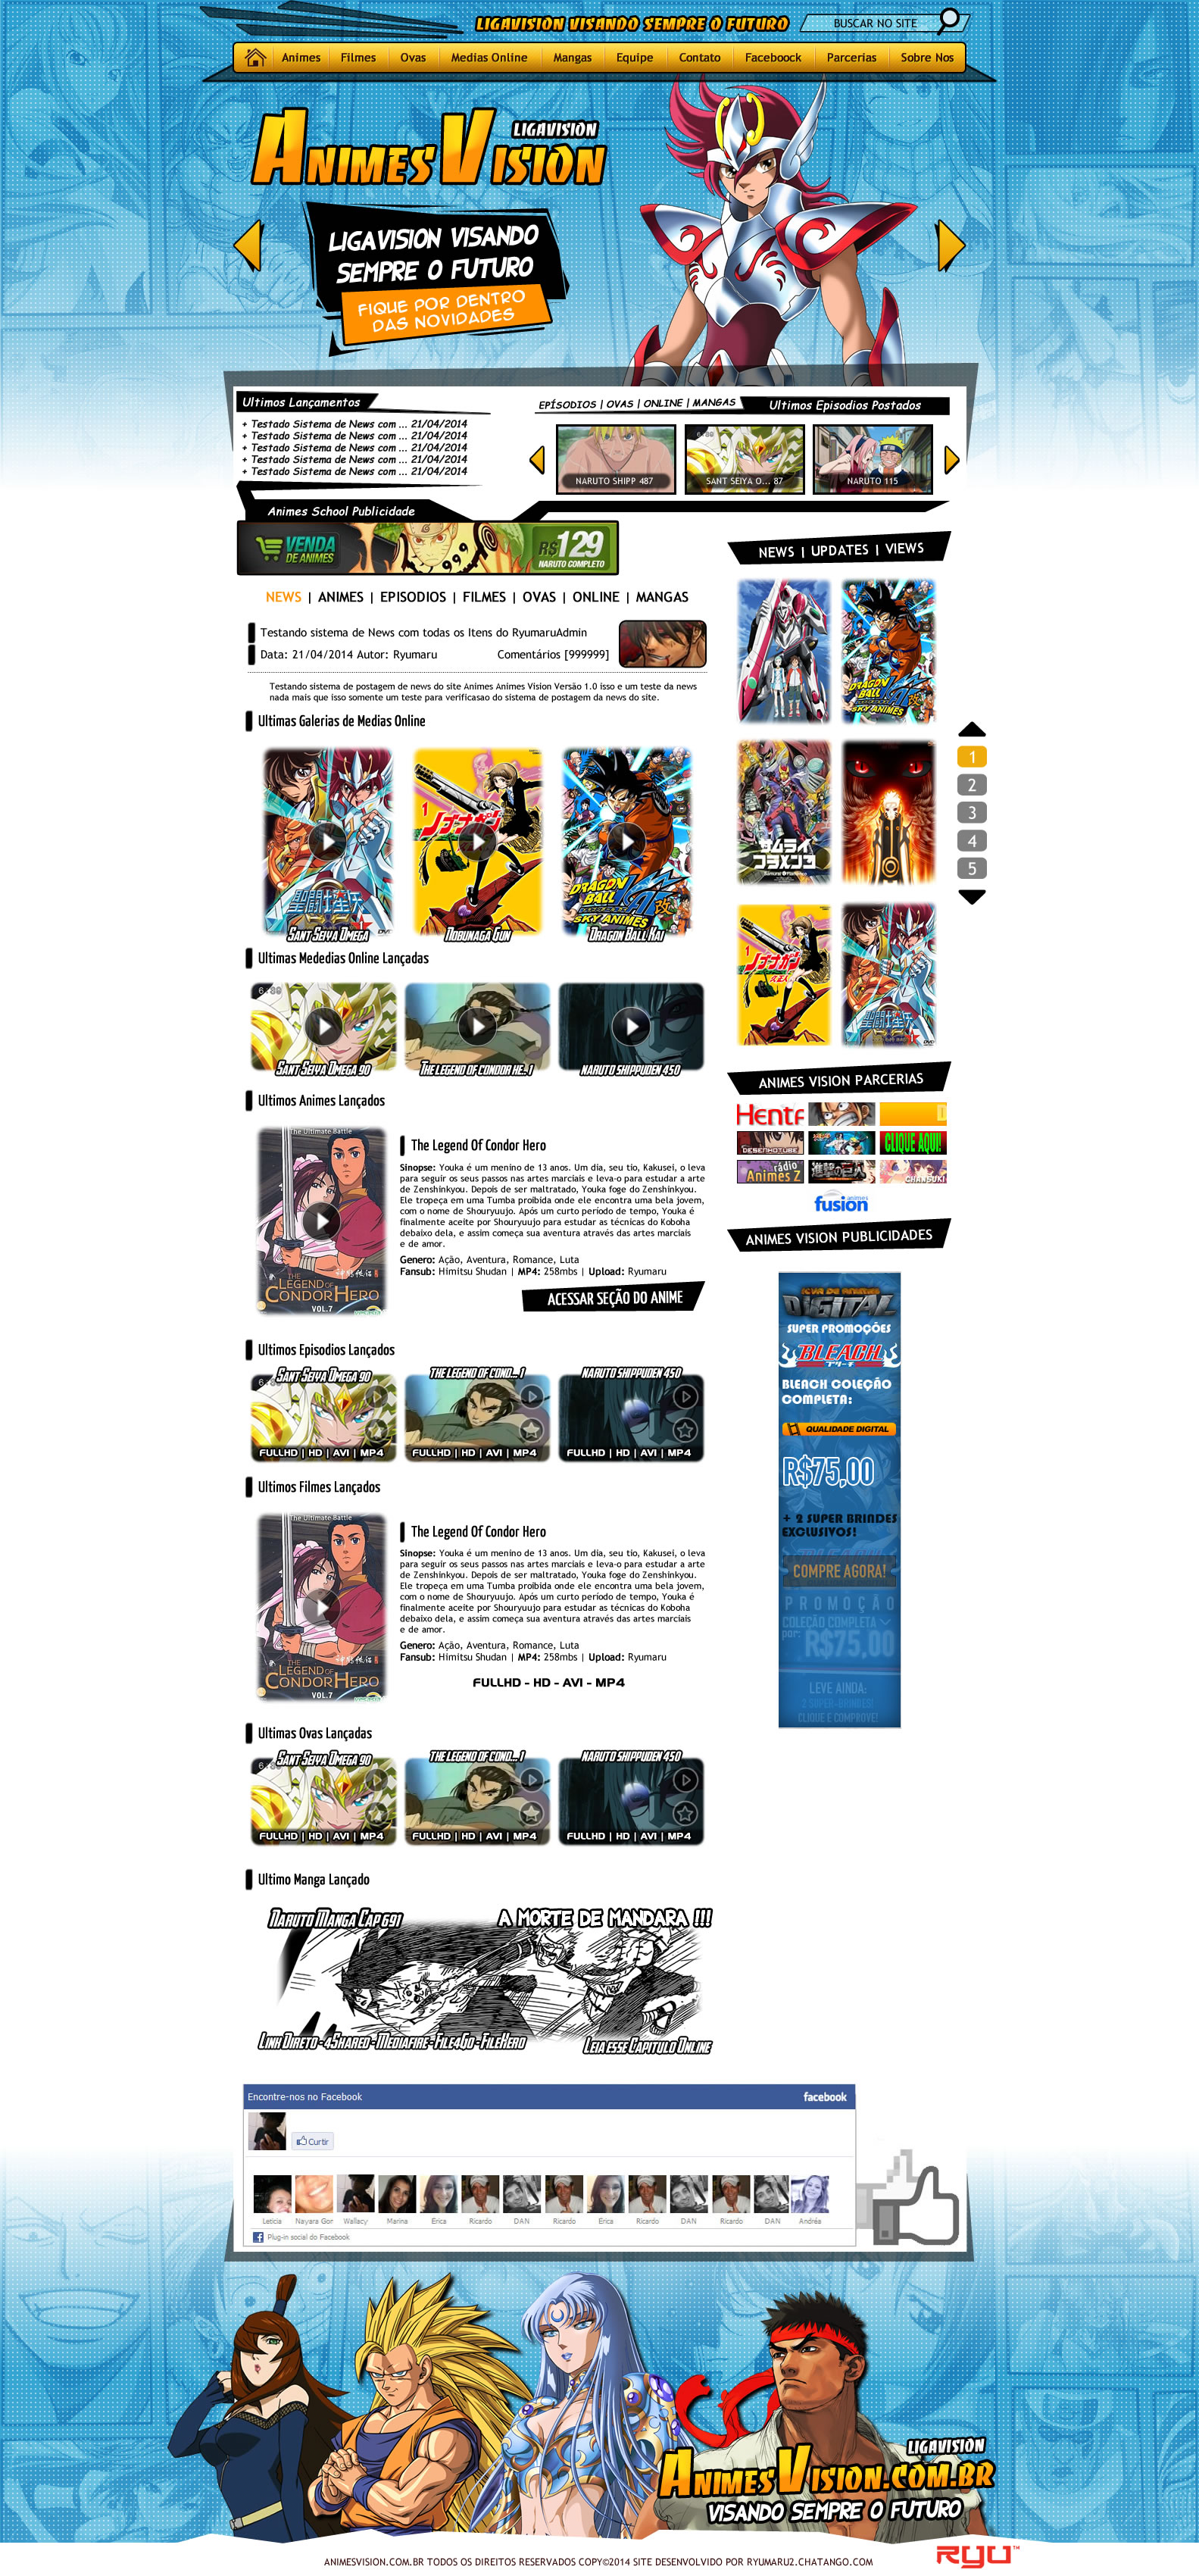 Anime Vision - Main Page